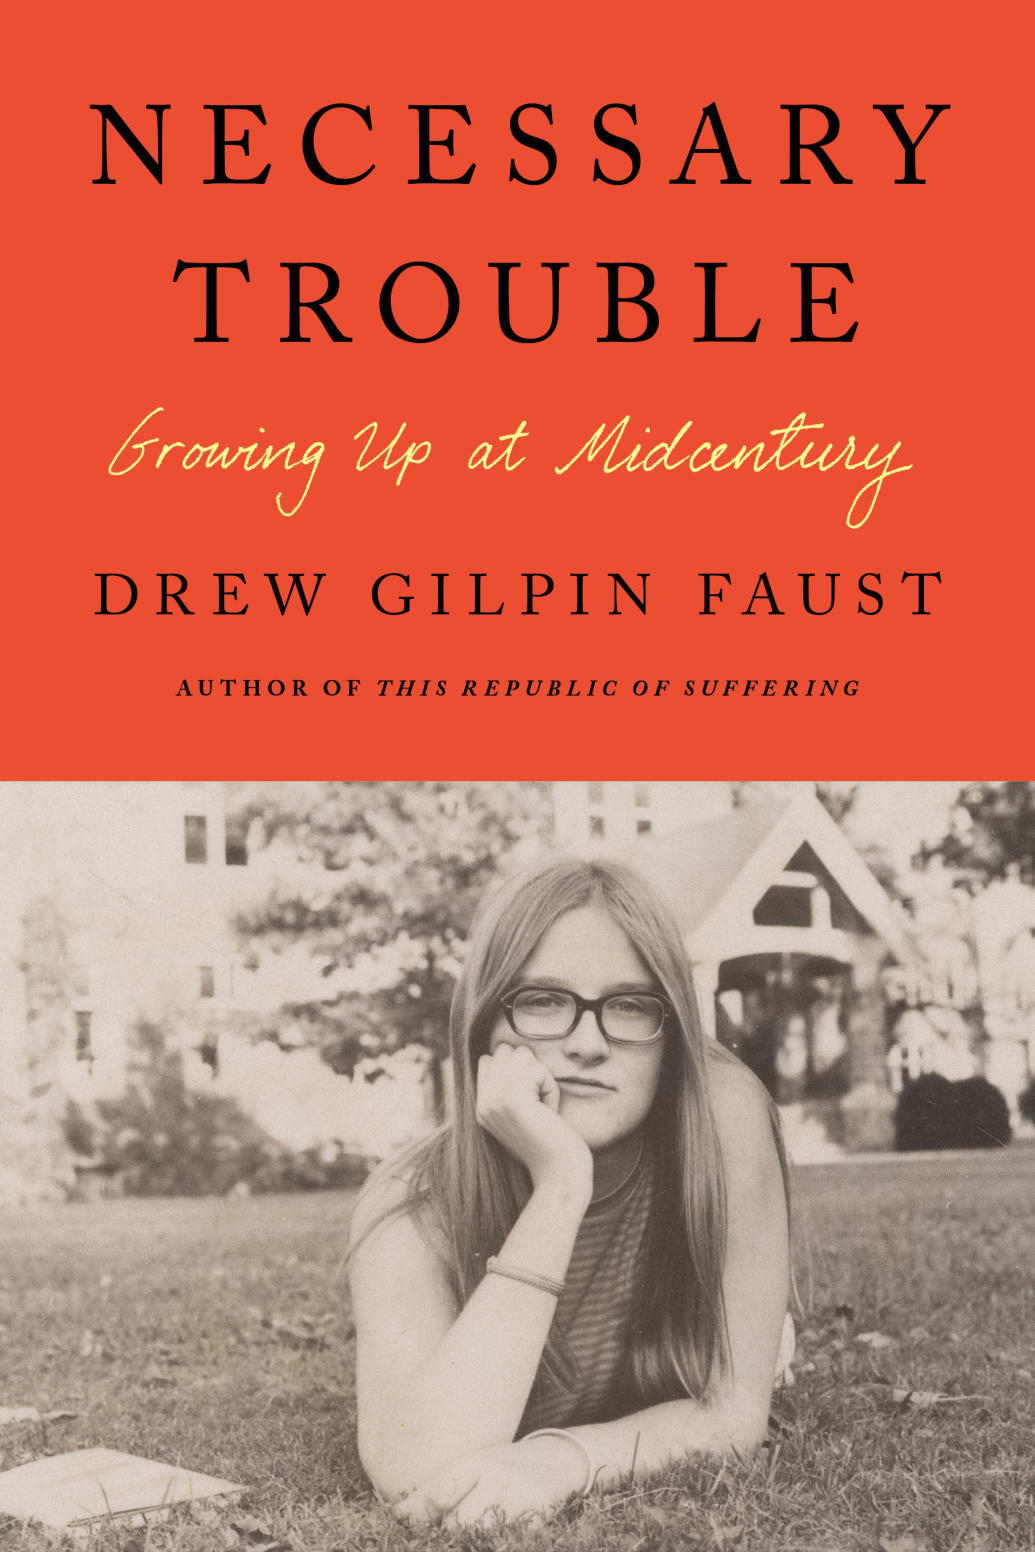 A photograph of the book cover Necessary Trouble: Growing Up at Midcentury by Faust.